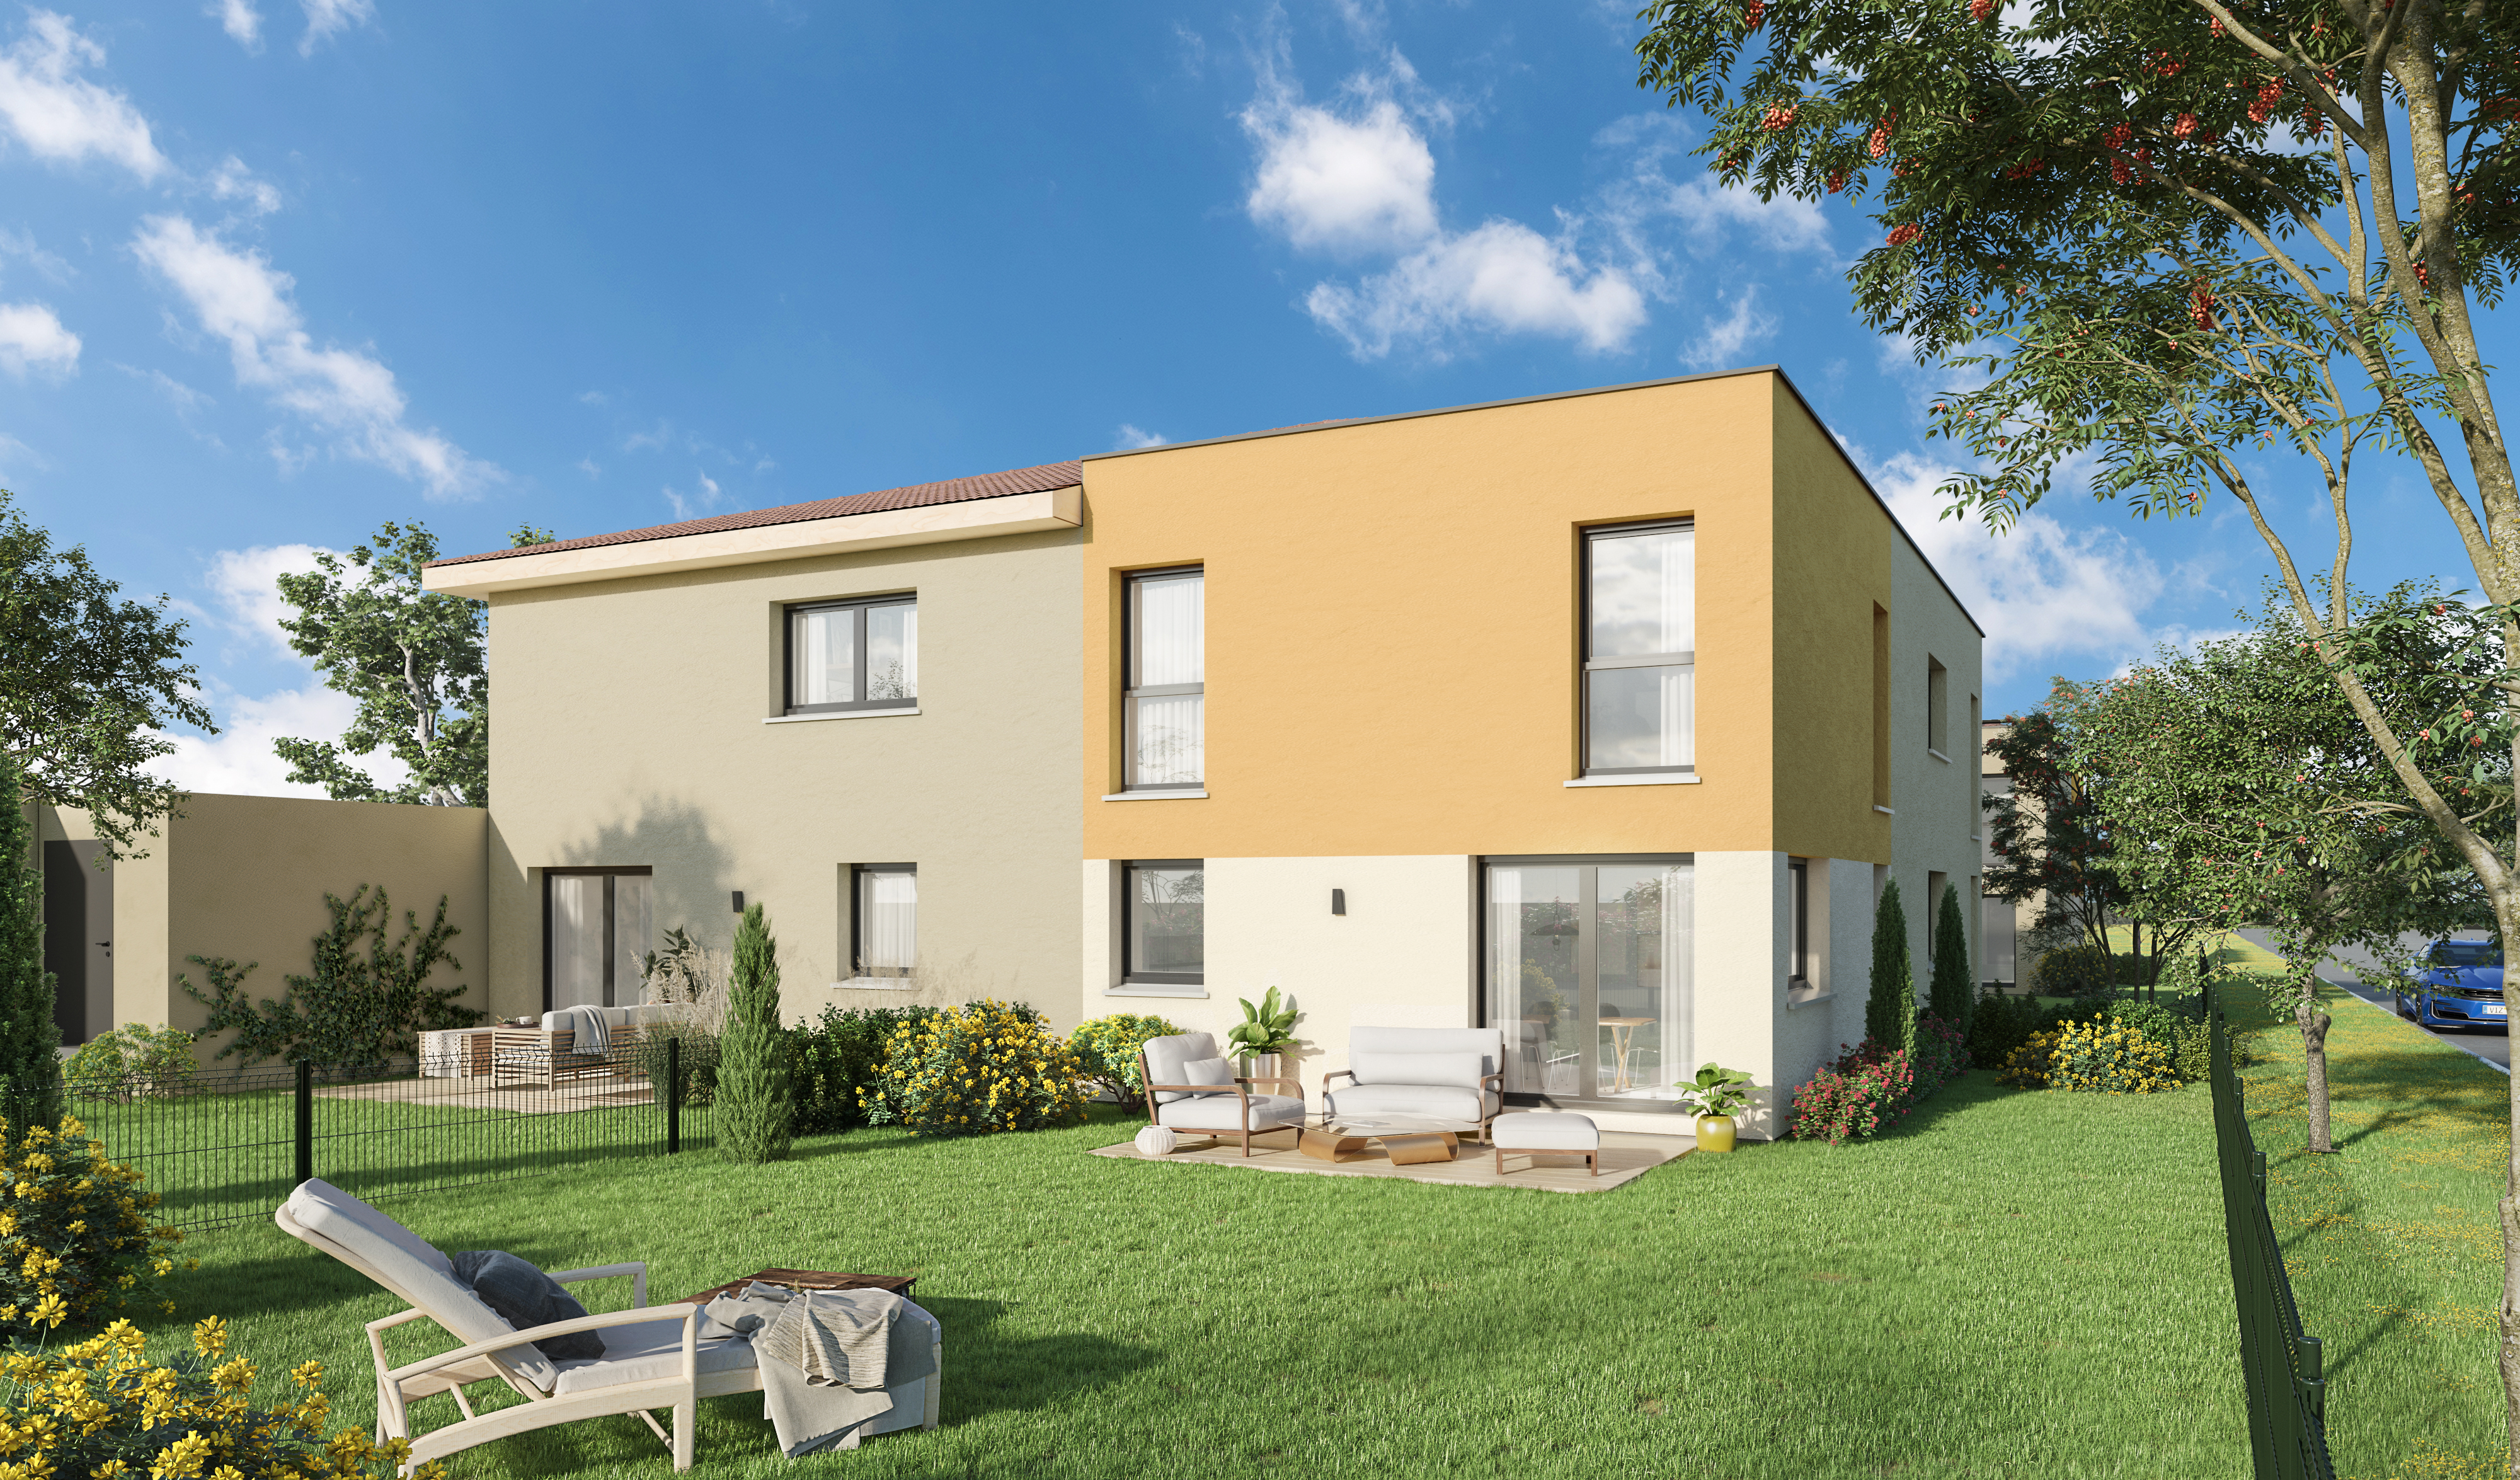 Programme immobilier neuf LES CARRES EPONINE